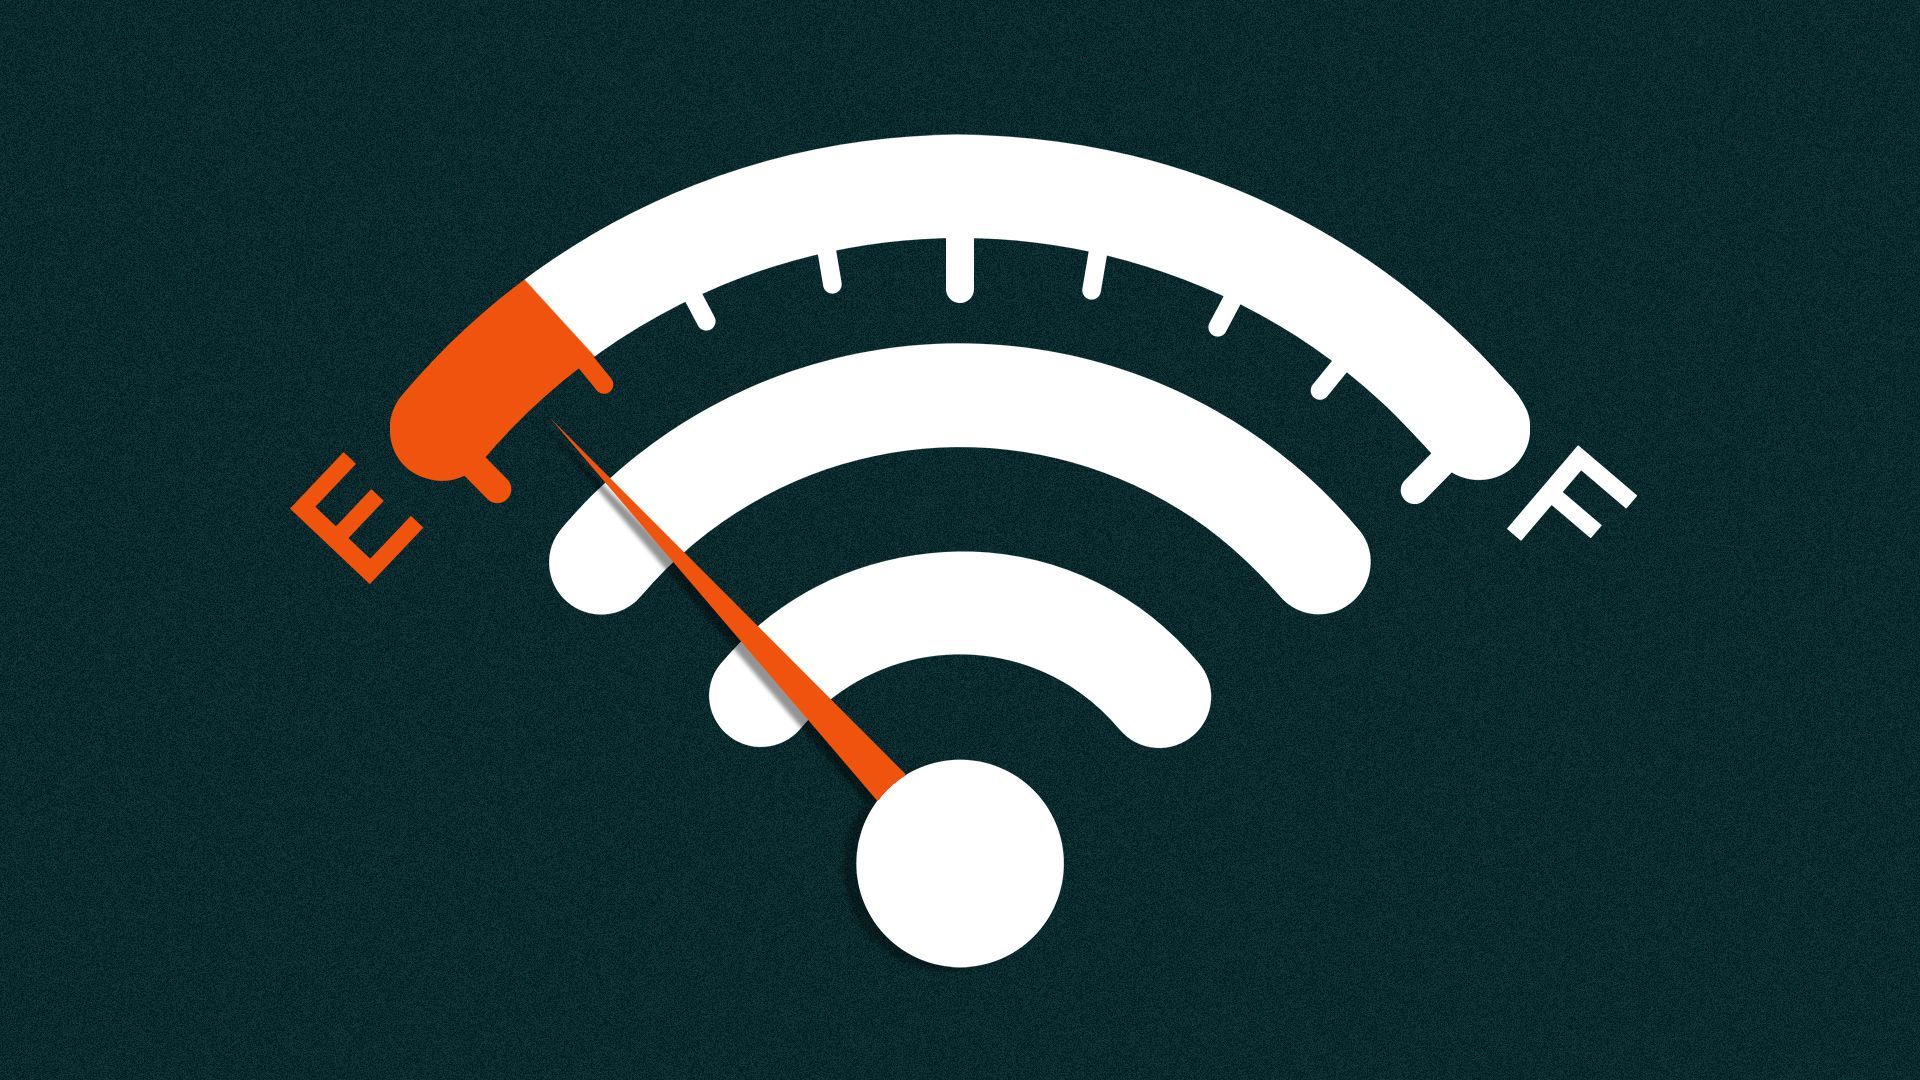 Illustration of a car’s gas gage made from a wifi symbol. The needle points to “Empty.”